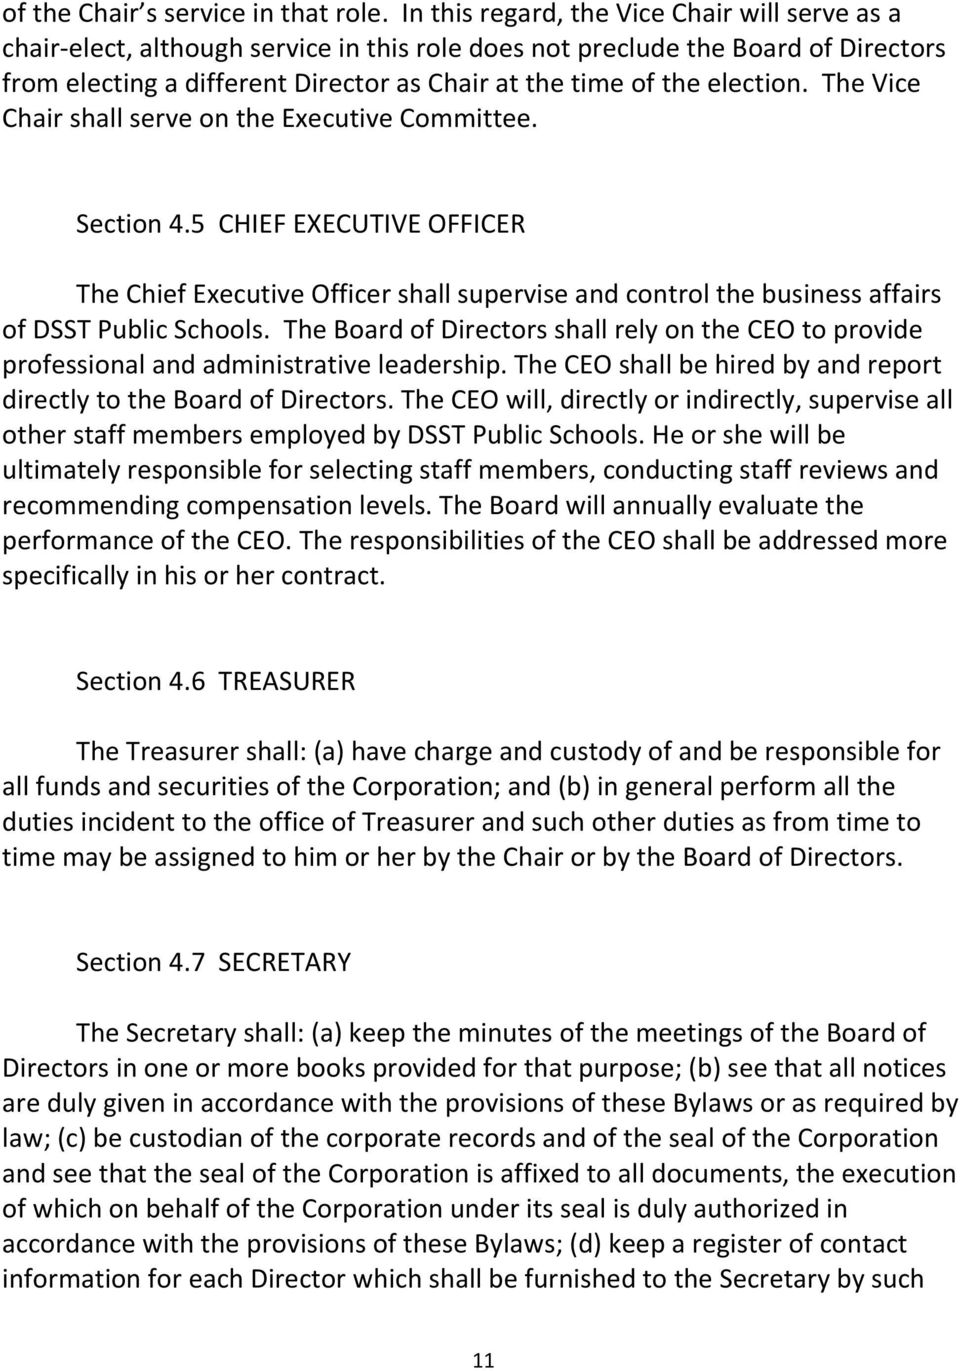 election. The Vice Chair shall serve on the Executive Committee. Section 4.